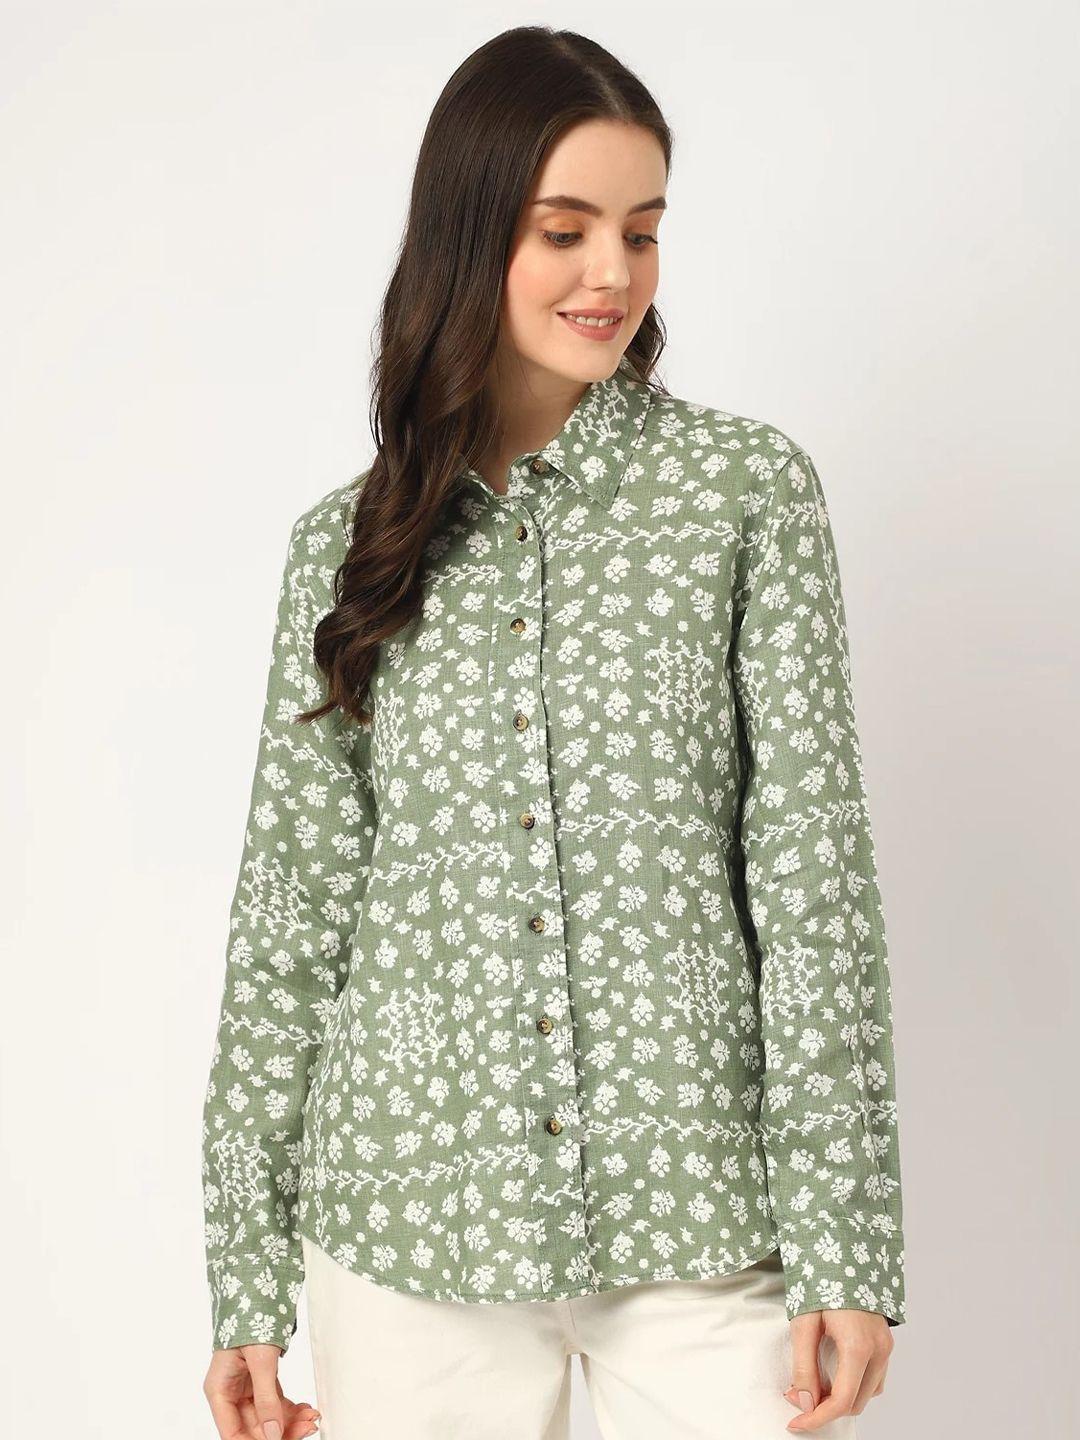 marks-&-spencer-women-floral-printed-casual-shirt